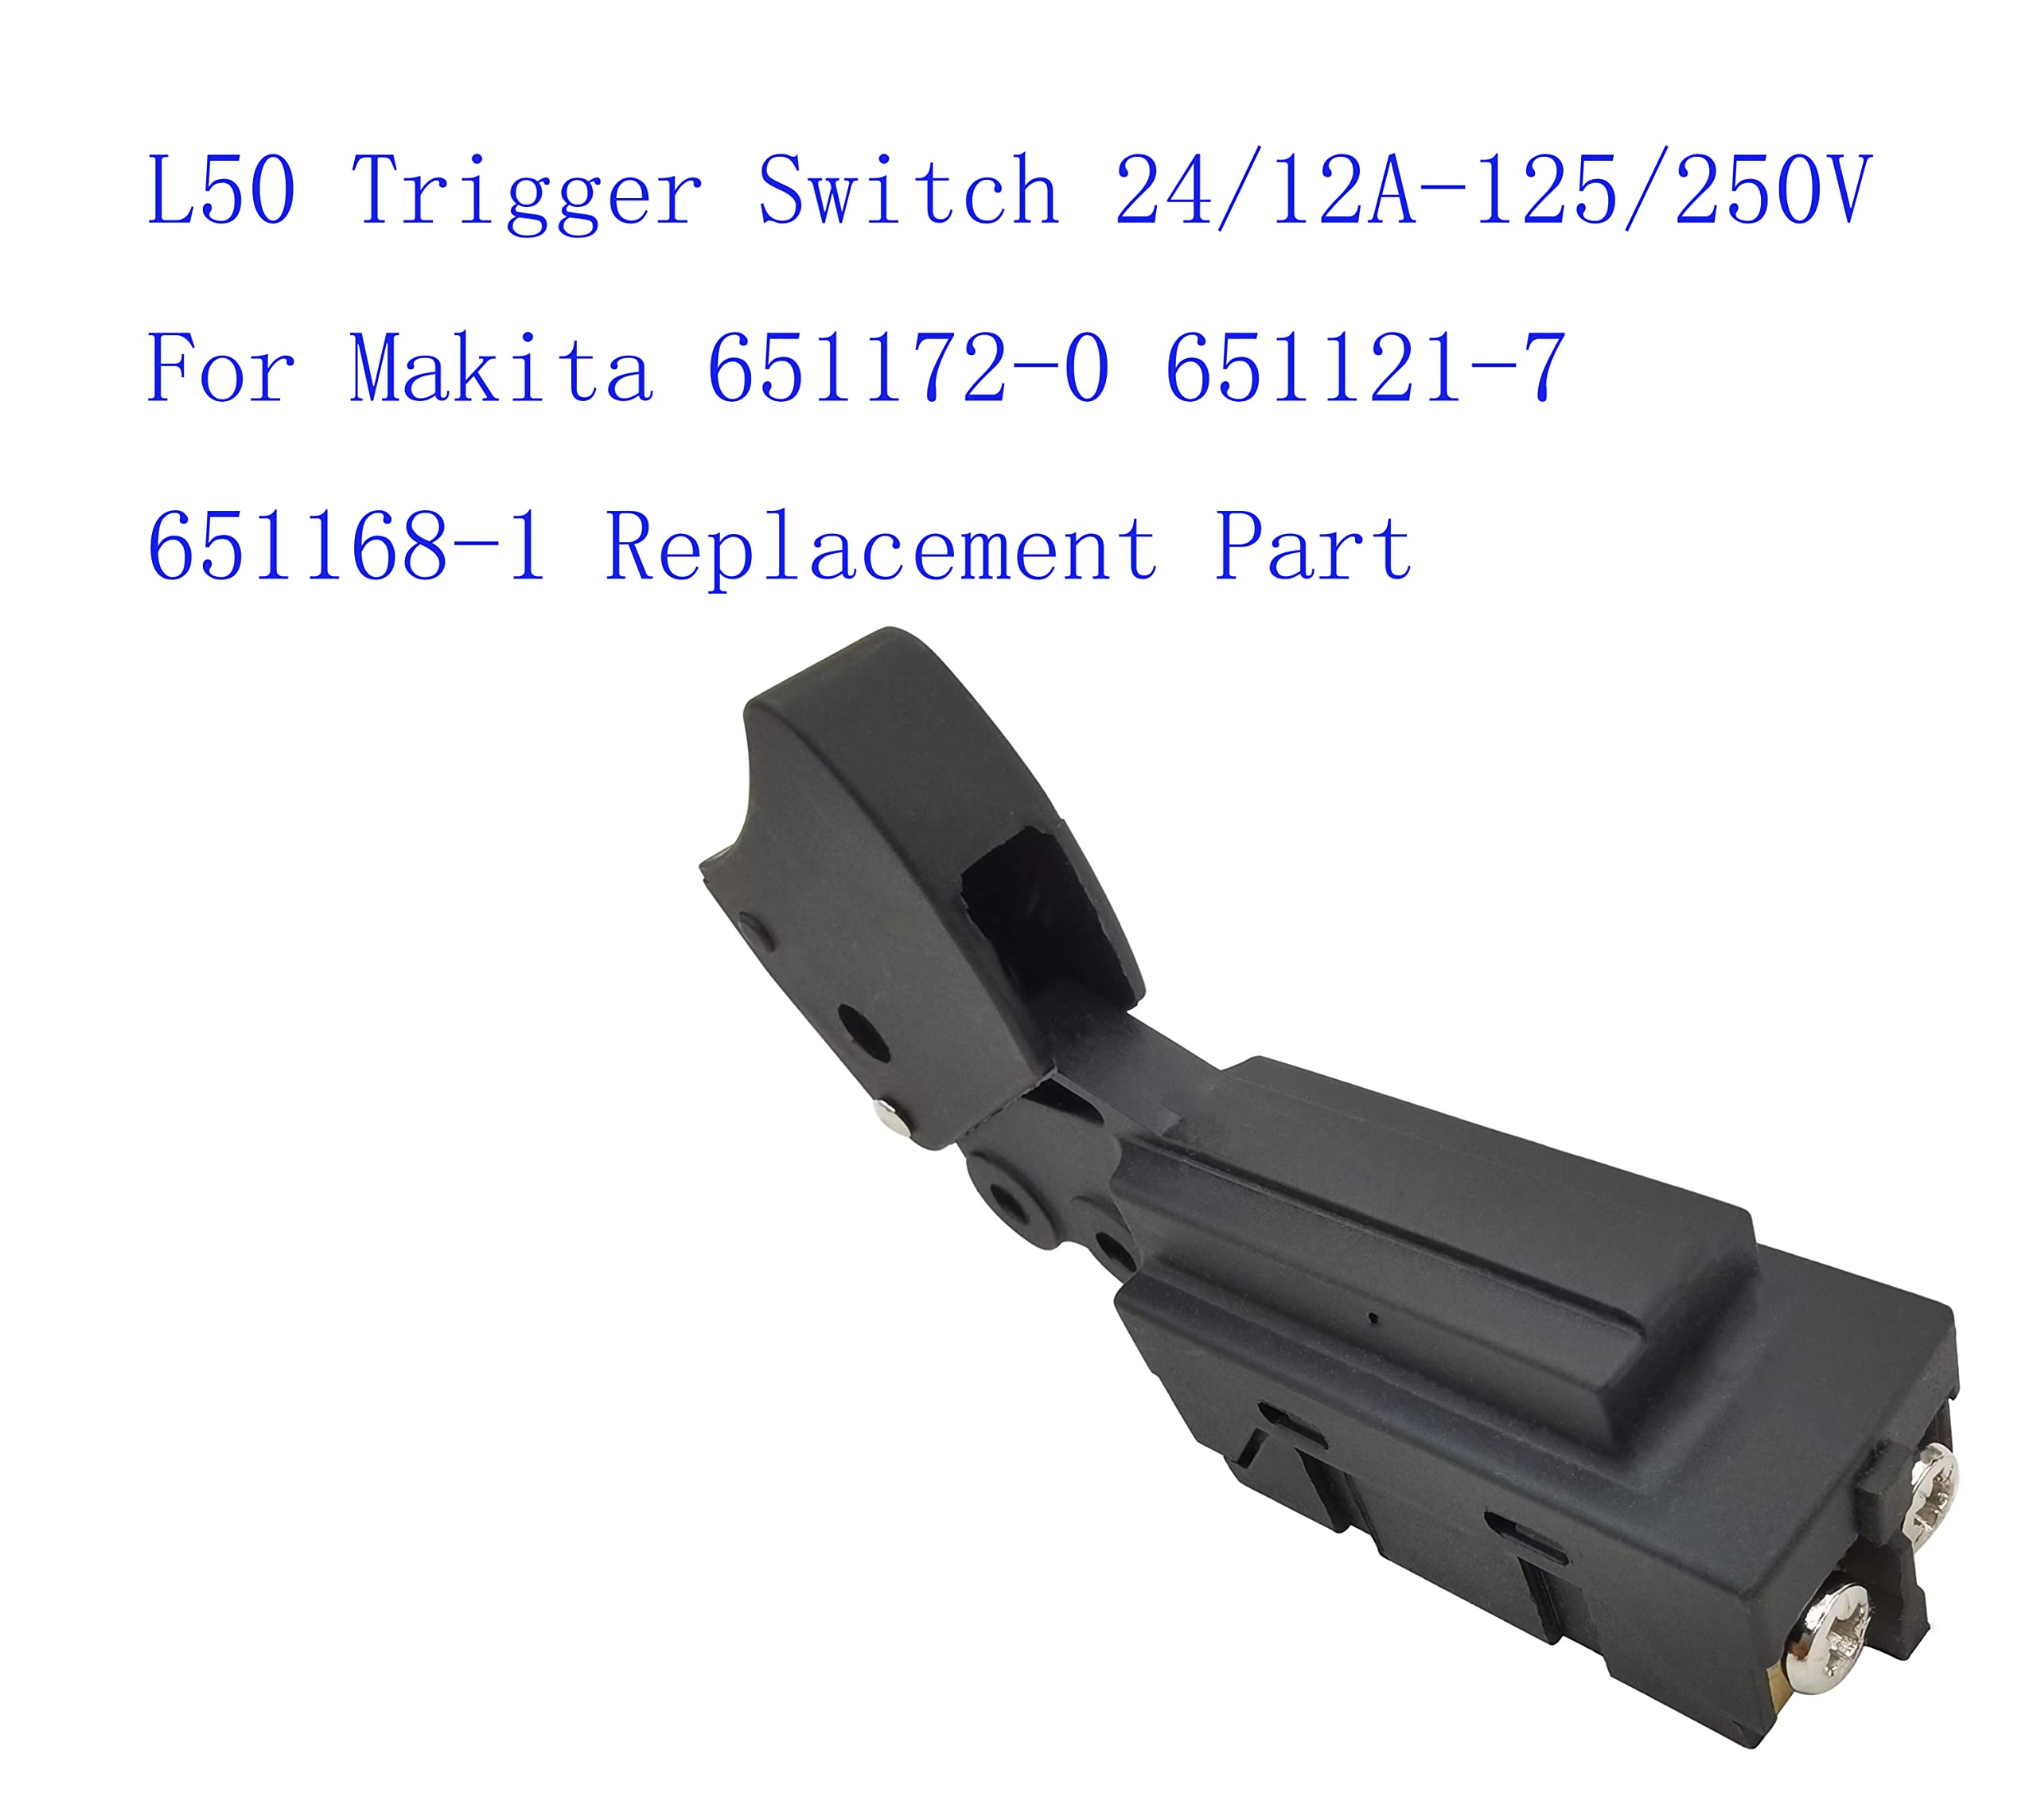 L50 Trigger Switch 24/12A-125/250V For Makita 651172-0 651121-7 651168-1 Replacement Part